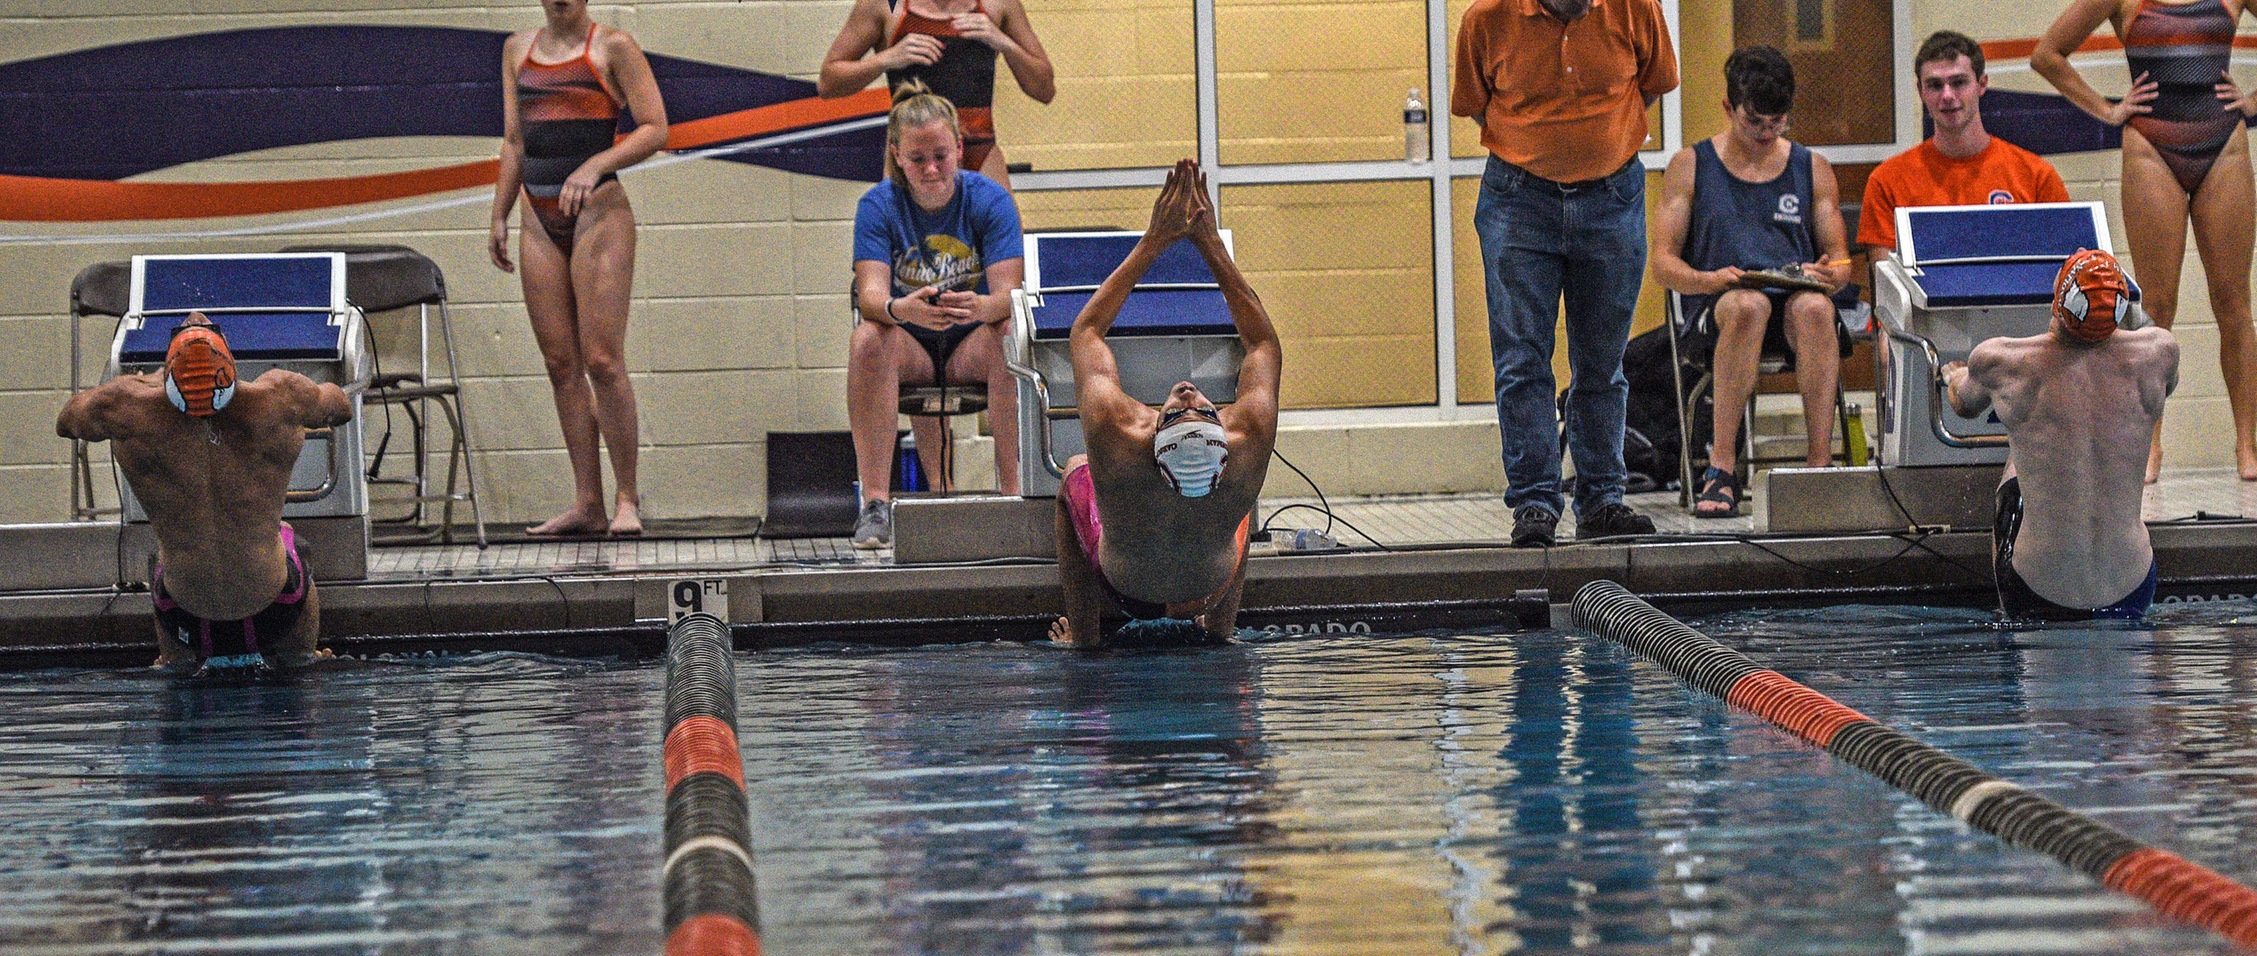 Eagles strong swims stunt Lions on Senior Day